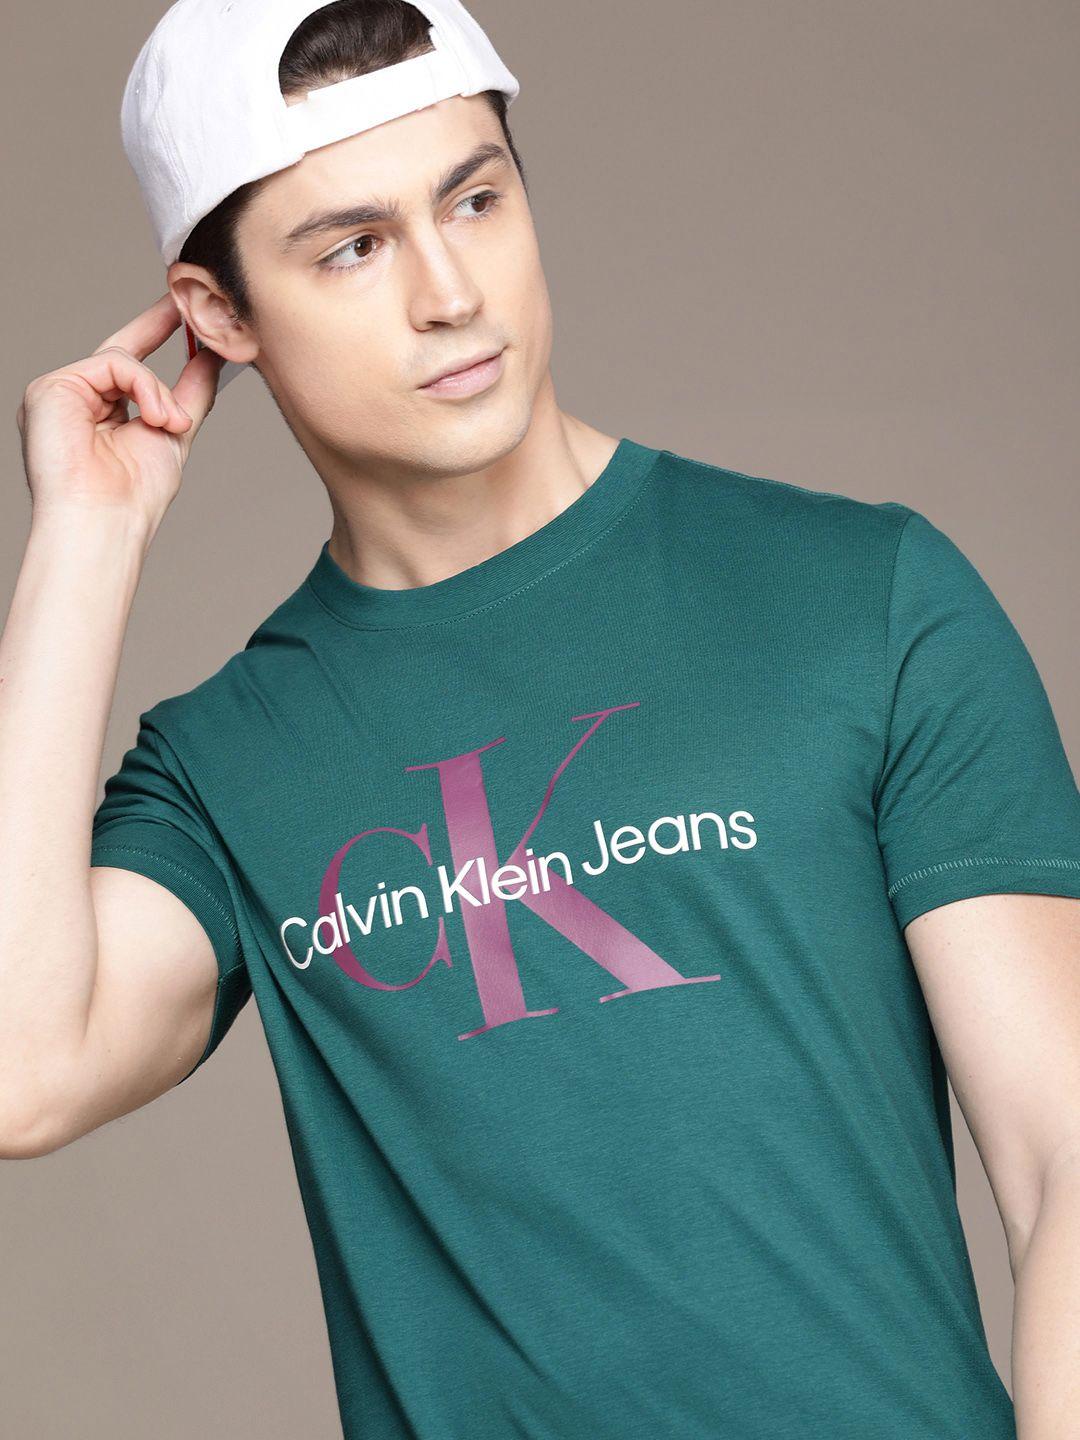 calvin klein jeans pure cotton brand logo printed regular fit casual t-shirt